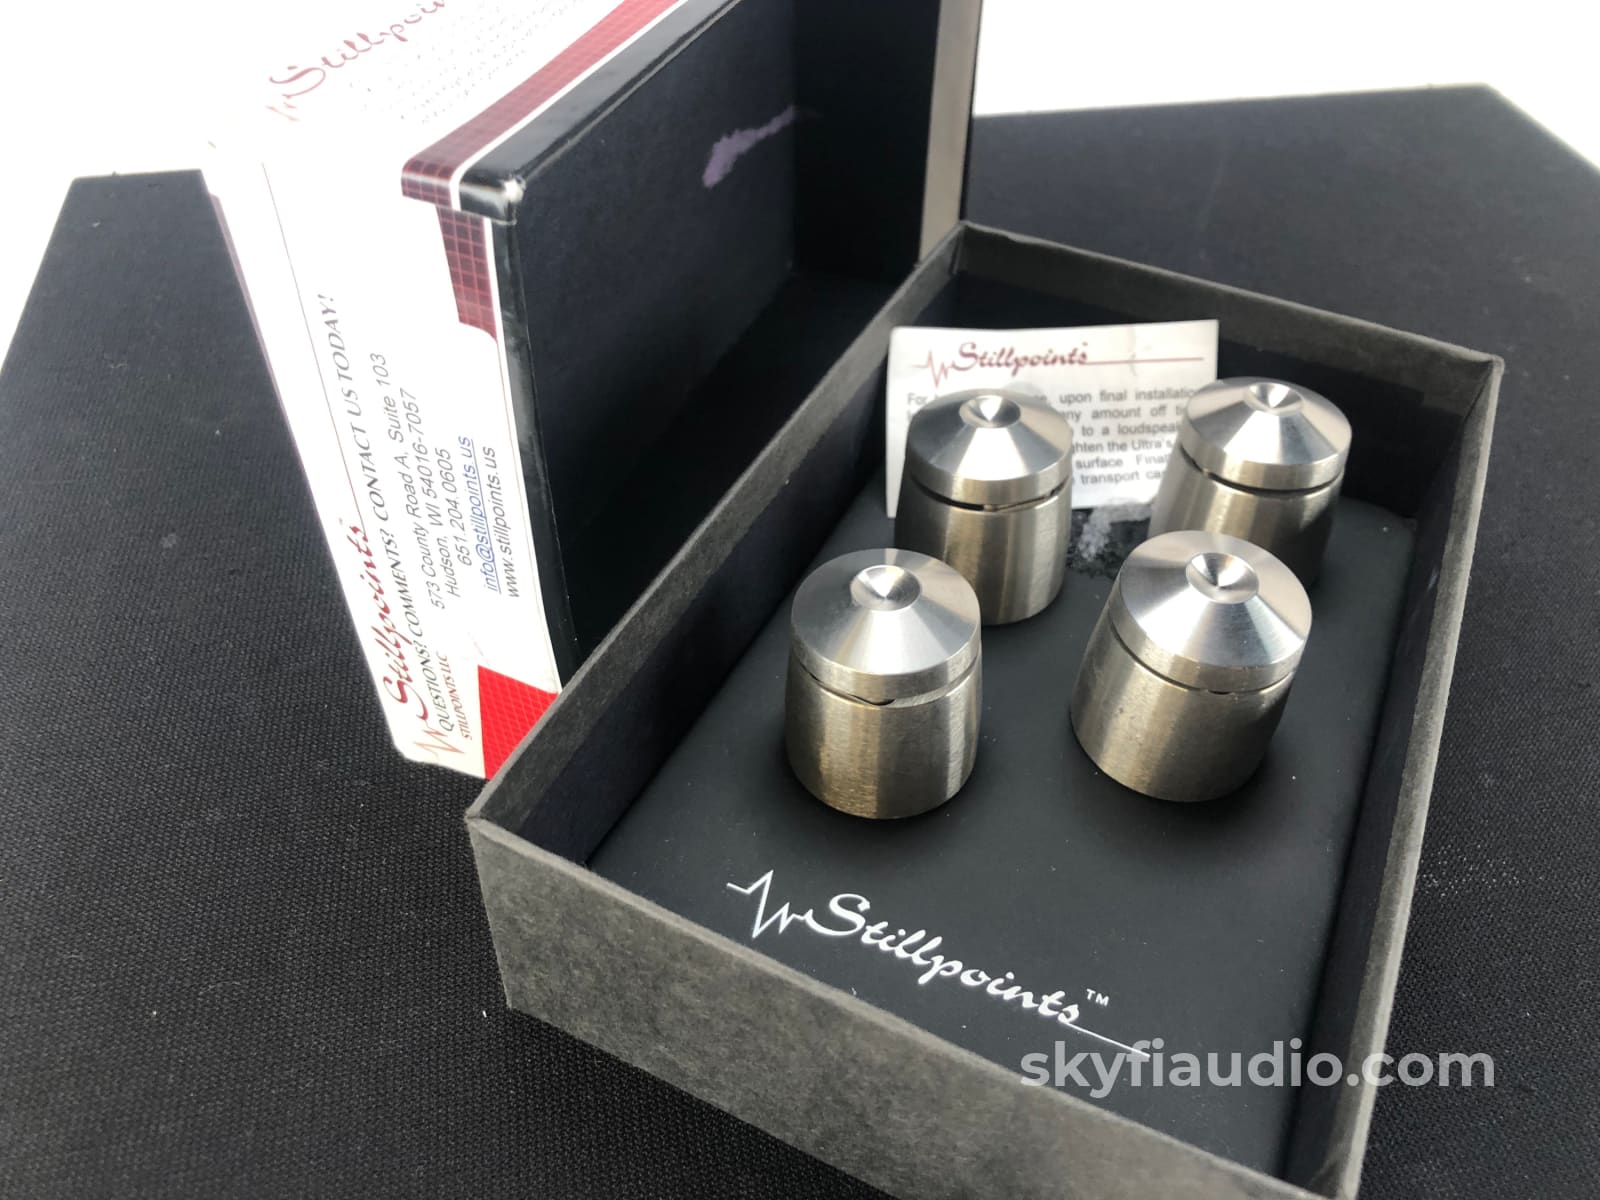 Stillpoints Ultra Ss (Stainless Steel) Audio Isolation Feet - In Box Accessory